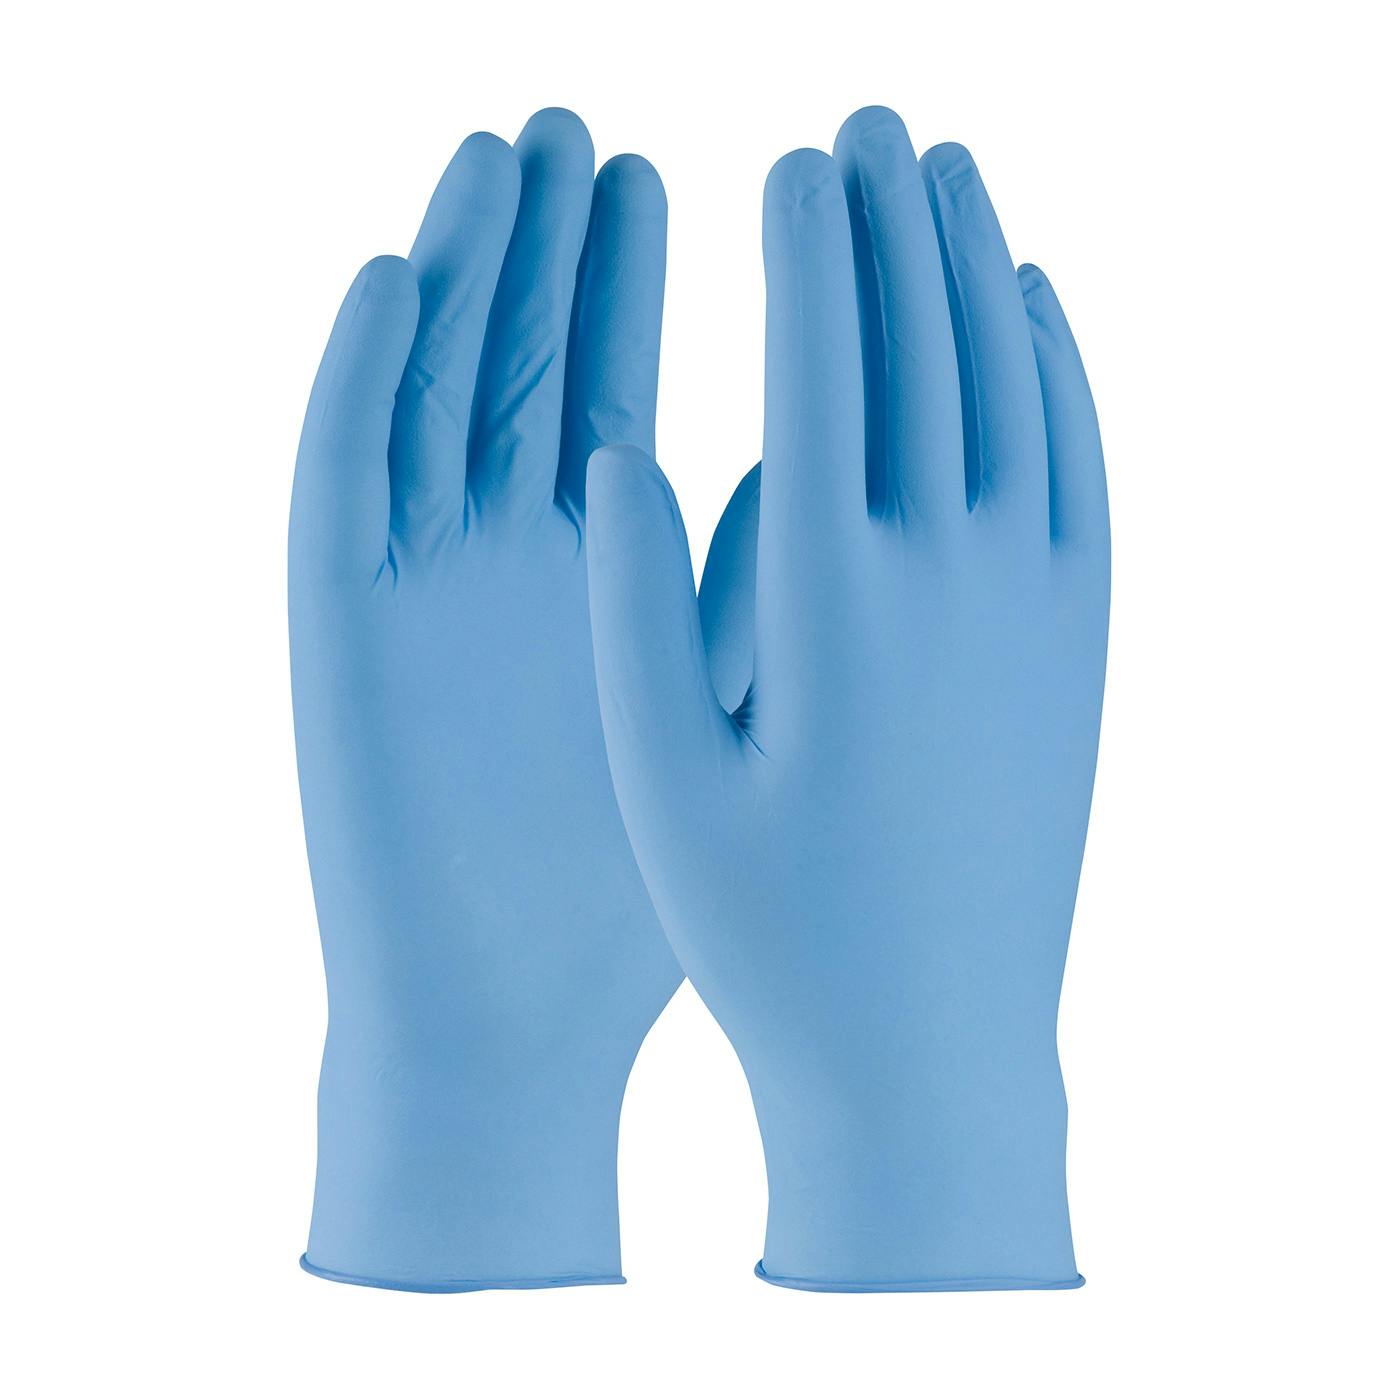 Ambi-dex® Turbo Disposable Nitrile Glove, Powdered with Textured Grip - 5 mil (63-332)_1